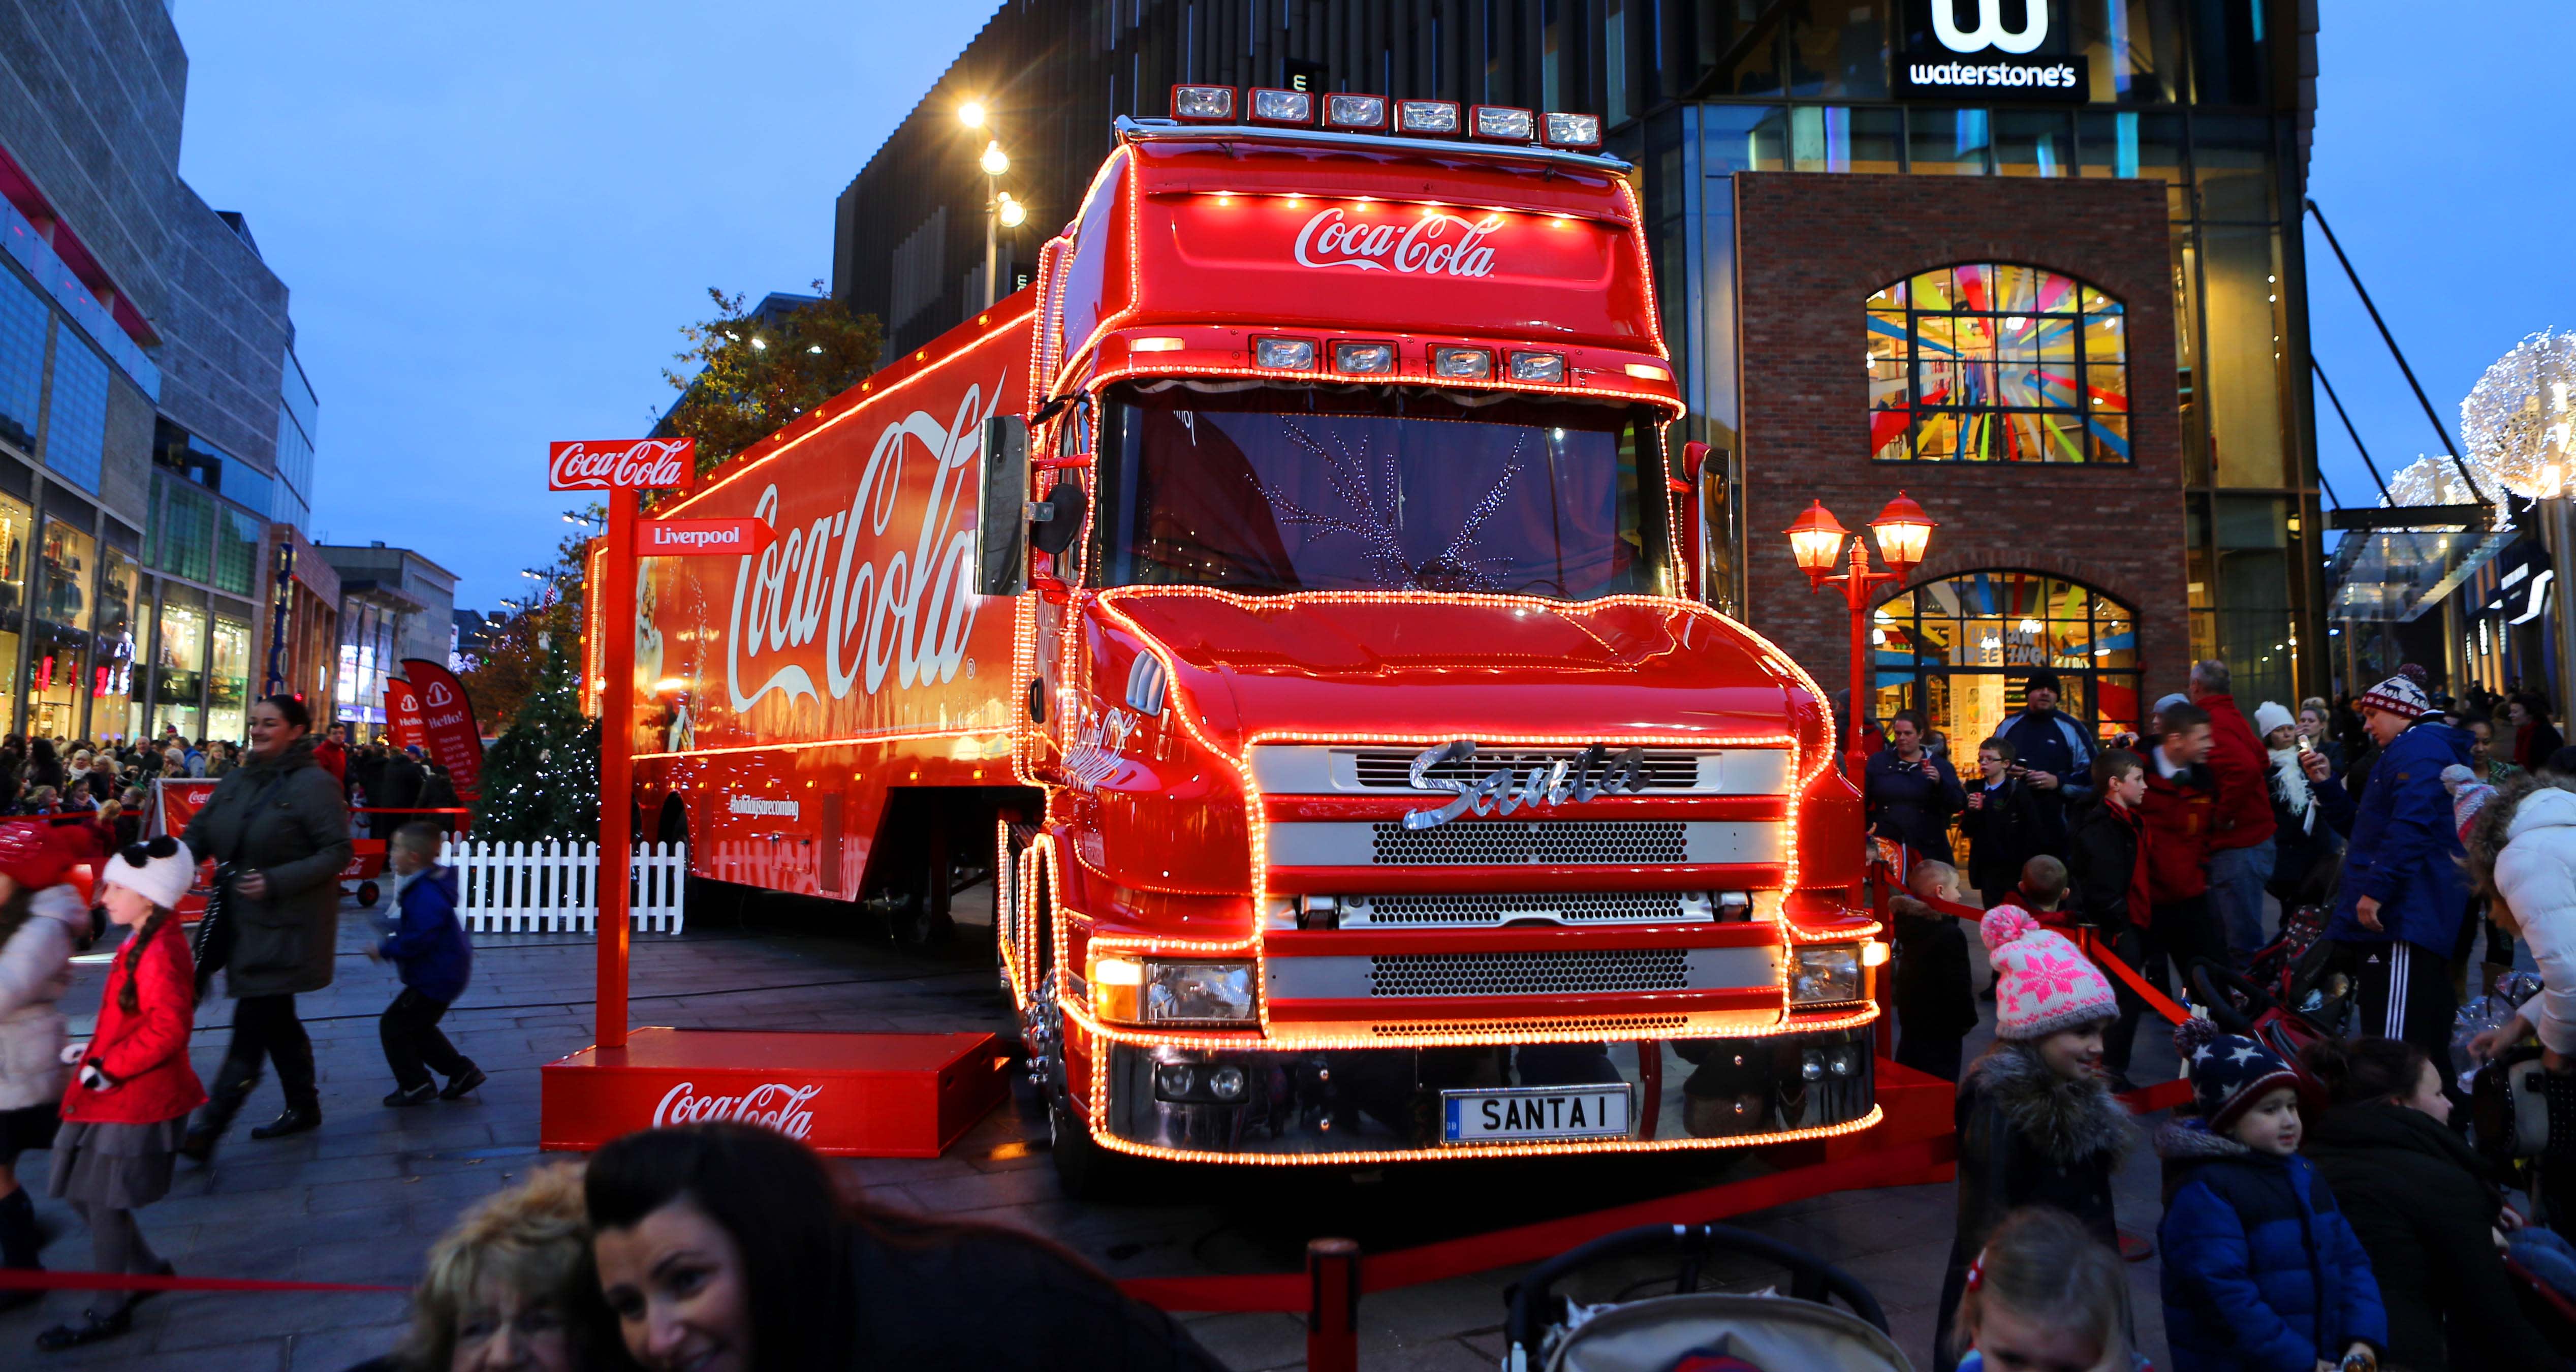 Stocks making the biggest moves midday: Coca-Cola, Disney, Deckers Outdoor & more